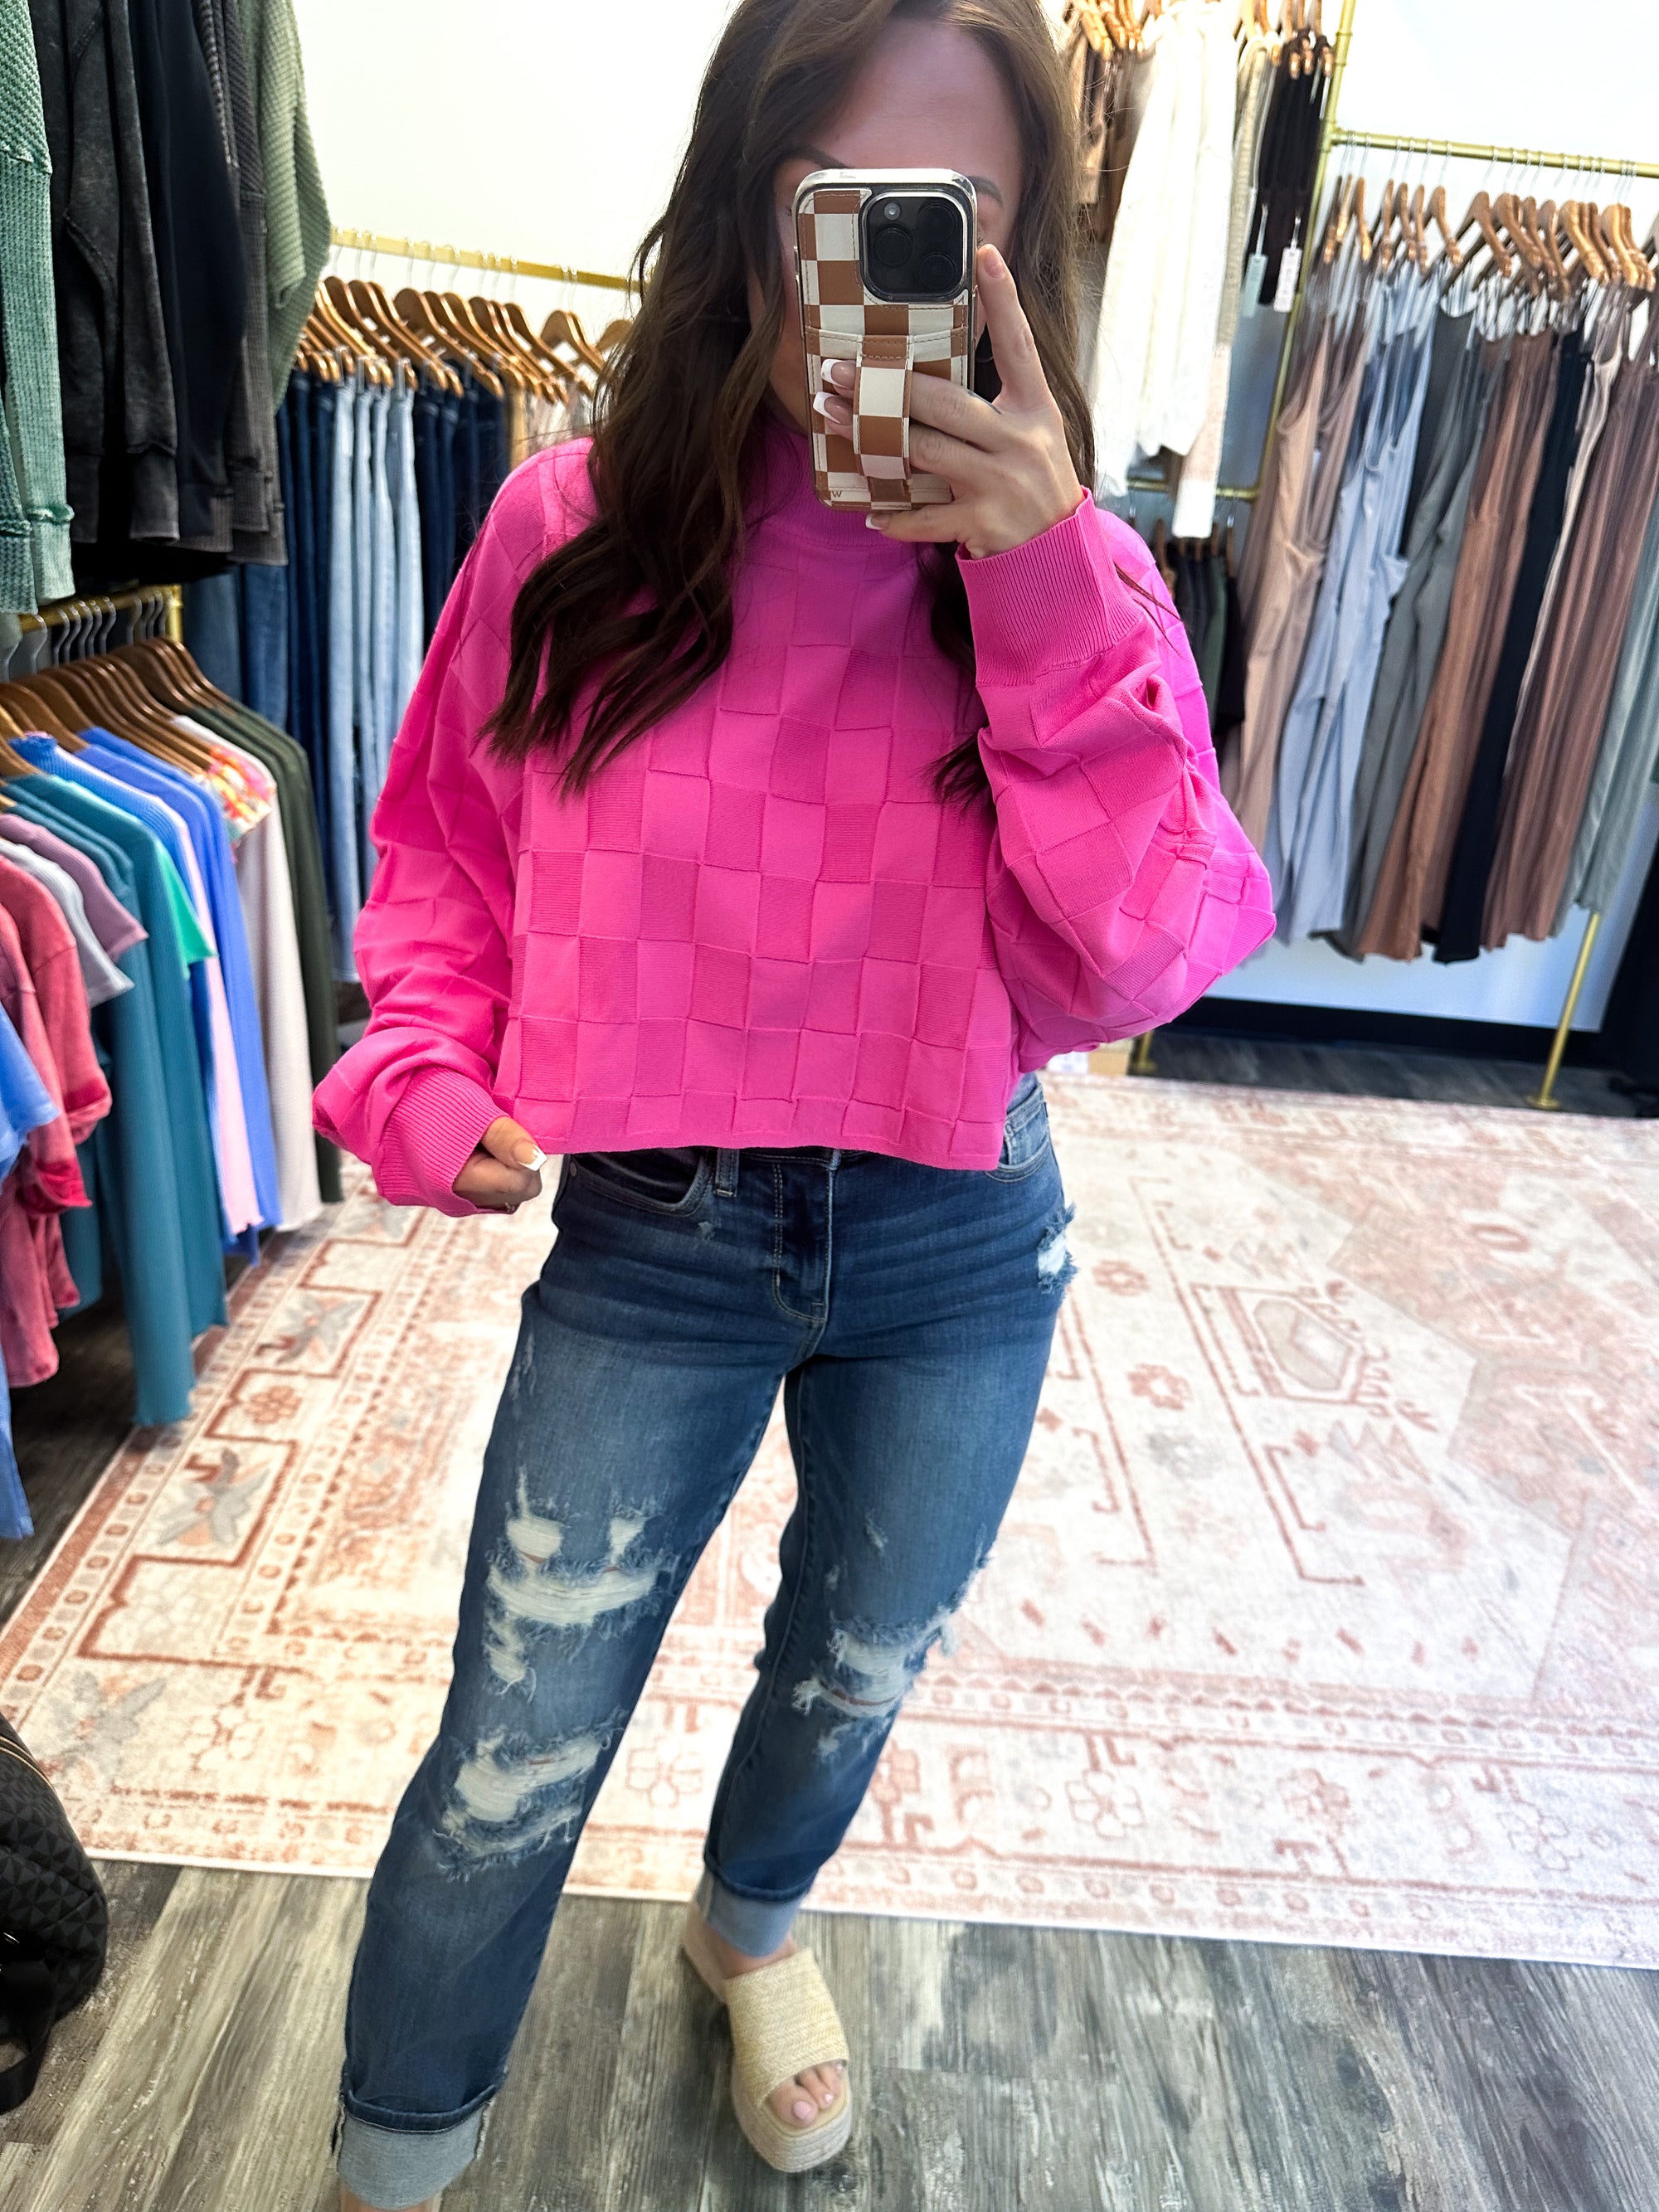 Light Up Your Life Checkered Sweater Top - Pink